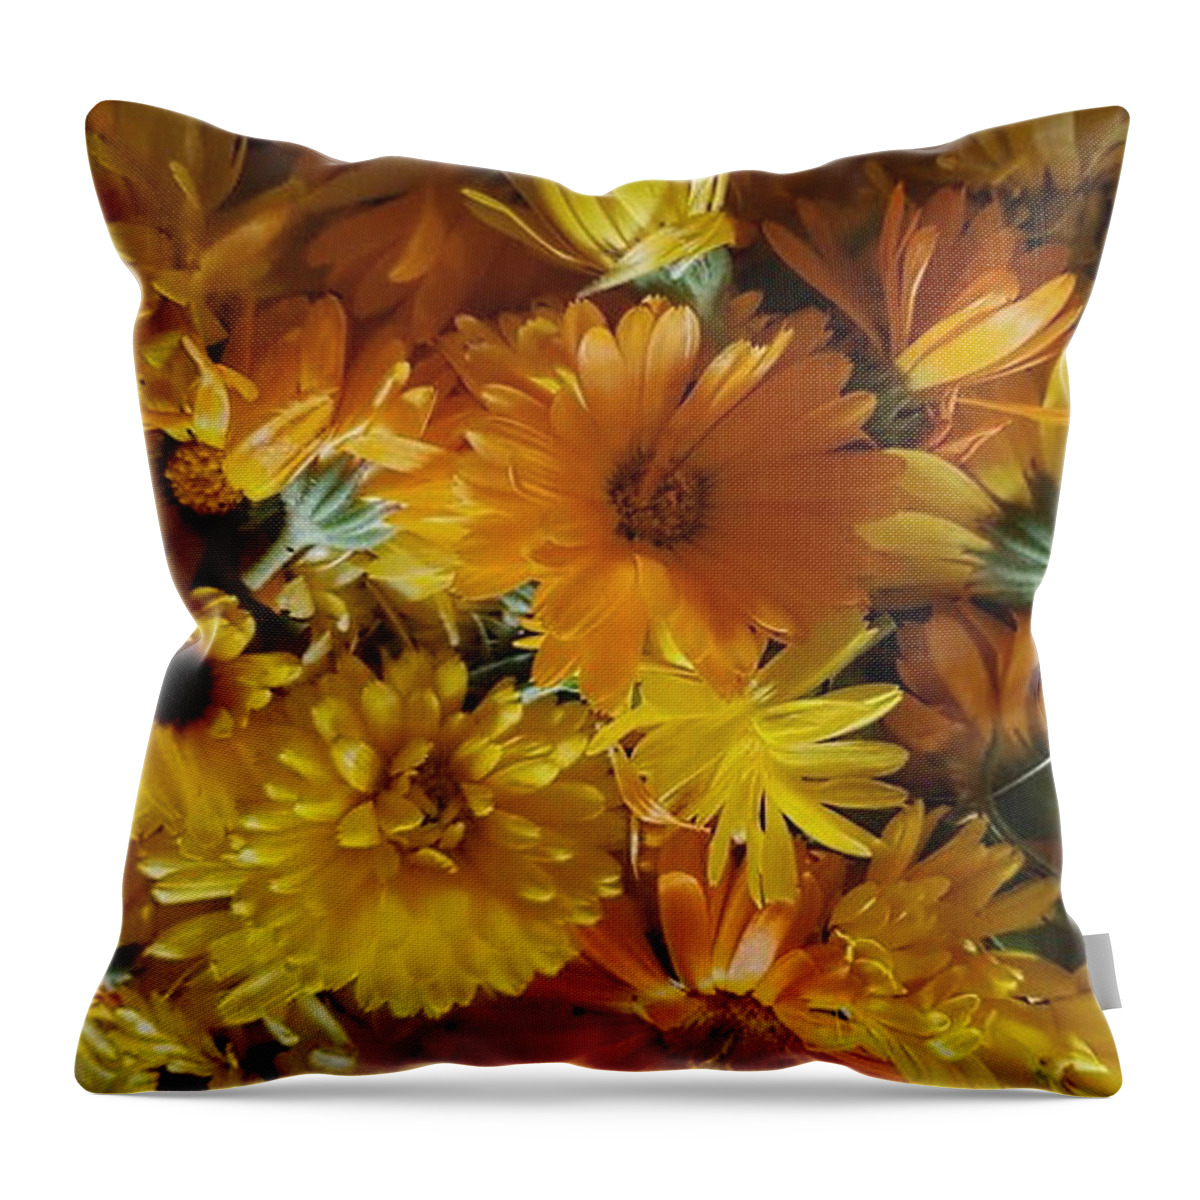 Orange Throw Pillow featuring the photograph Calendula Blossom Sunrise by Vicki Noble